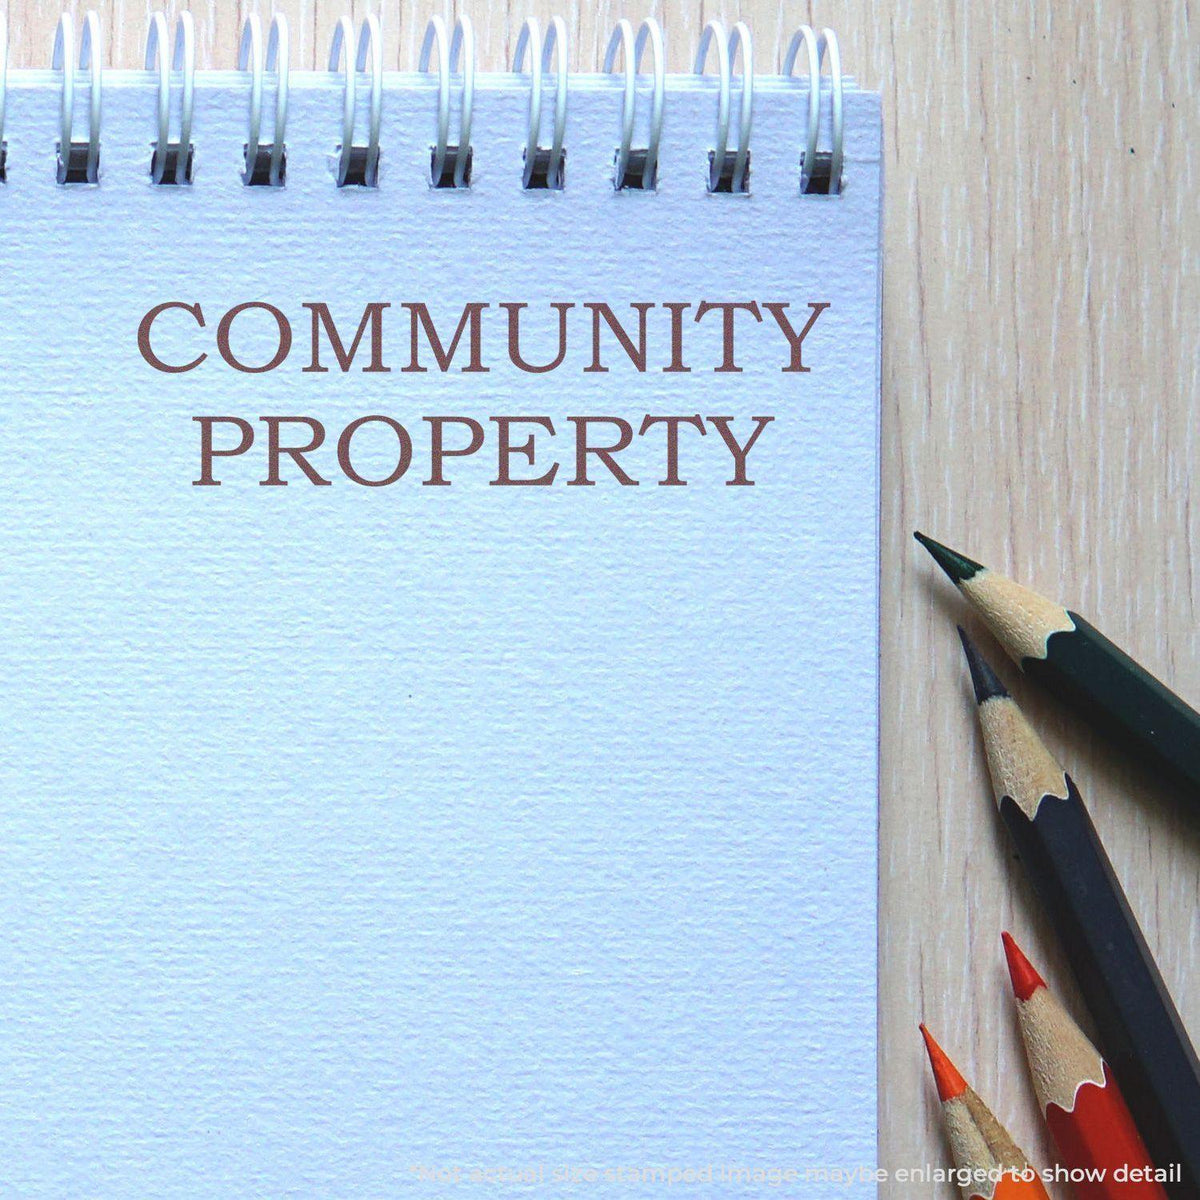 In Use Large Self Inking Community Property Stamp Image